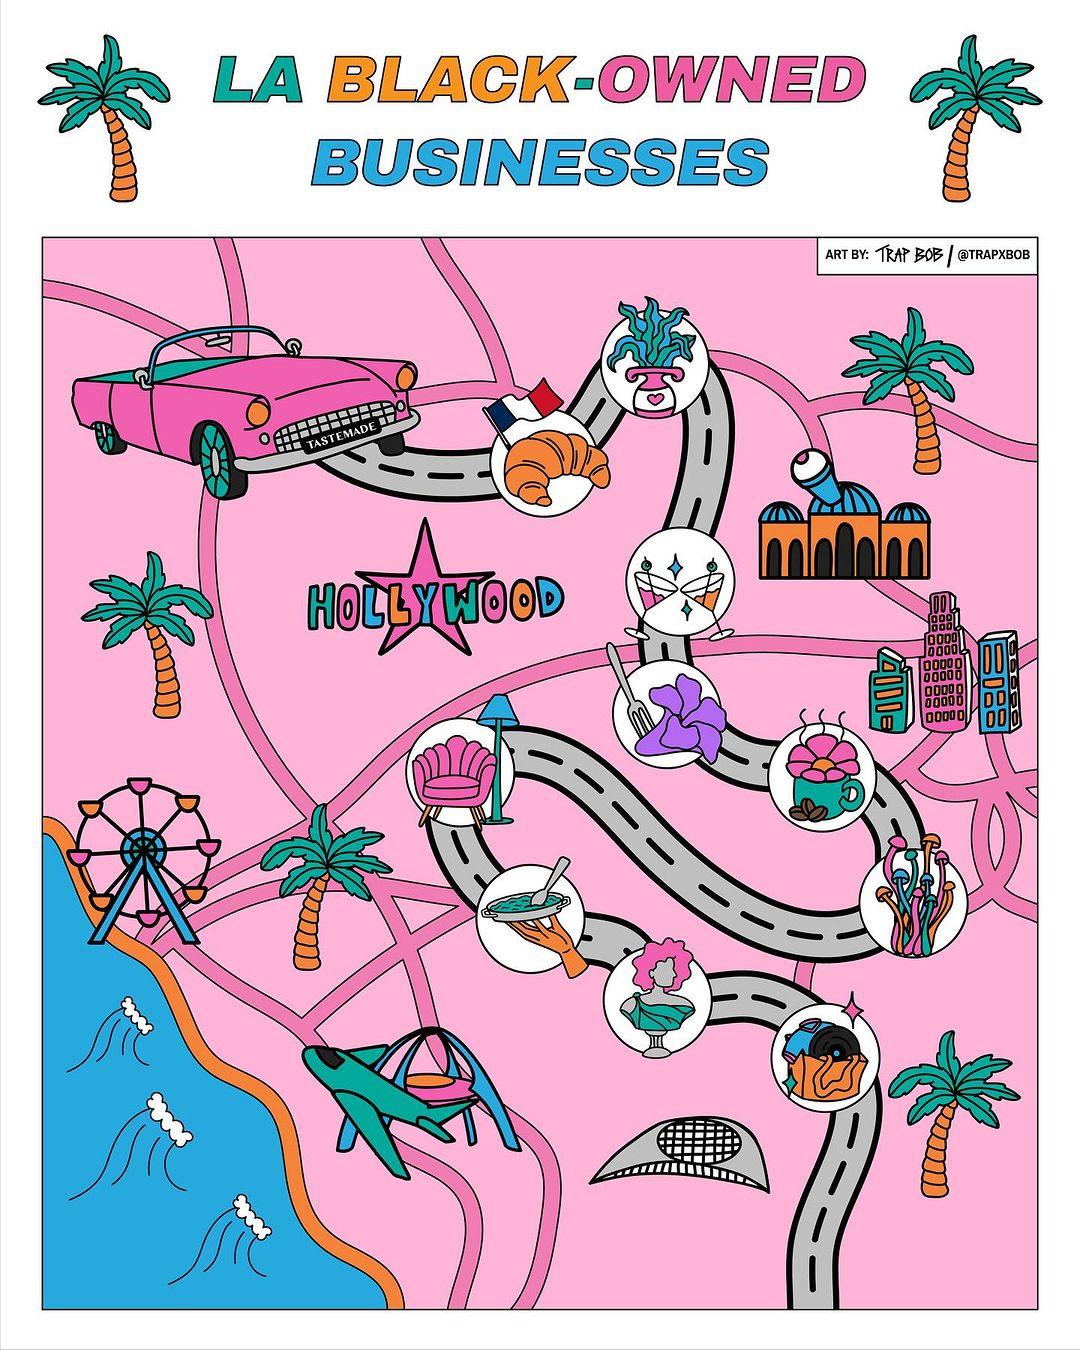 Get in besties, we’re shopping local this month! 🛍️

We worked with the amazing @trapxbob to create this illustrated map of Black-owned businesses throughout the LA area. From @blackmarketflea to @bloomandplumecoffee we’re showing the love to some of our favorite local spots in the city. Tap the #linkinbio for more info on these locations! 

Tag another small business you’re supporting this Black History Month! 👇